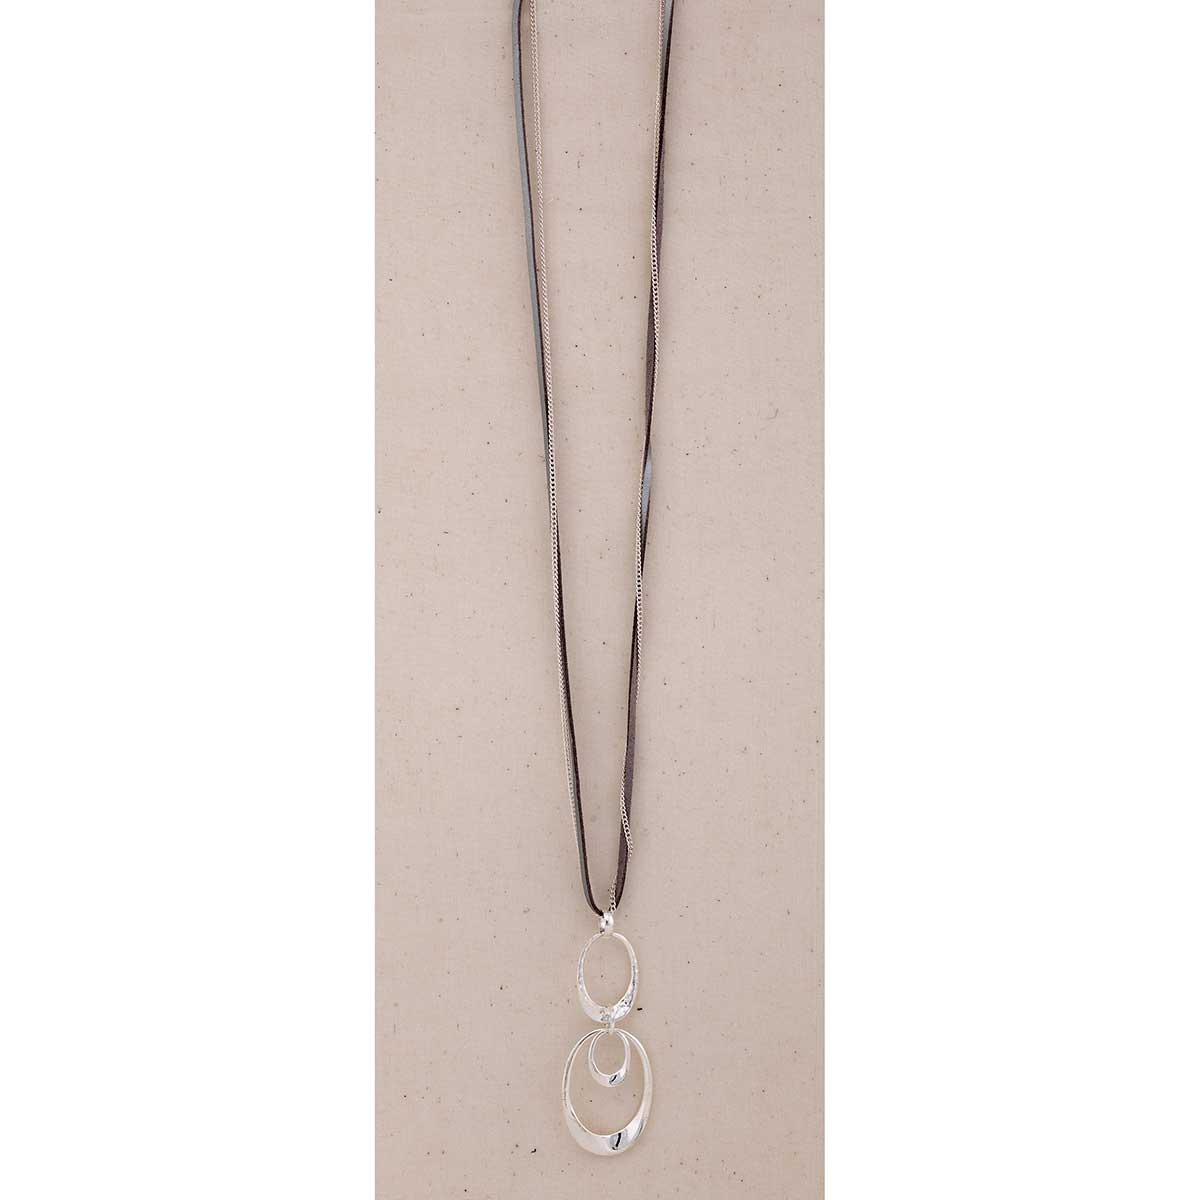 Silver 1.25"x3" Oval Hoop on Chain and Cord Necklace 28"-30"